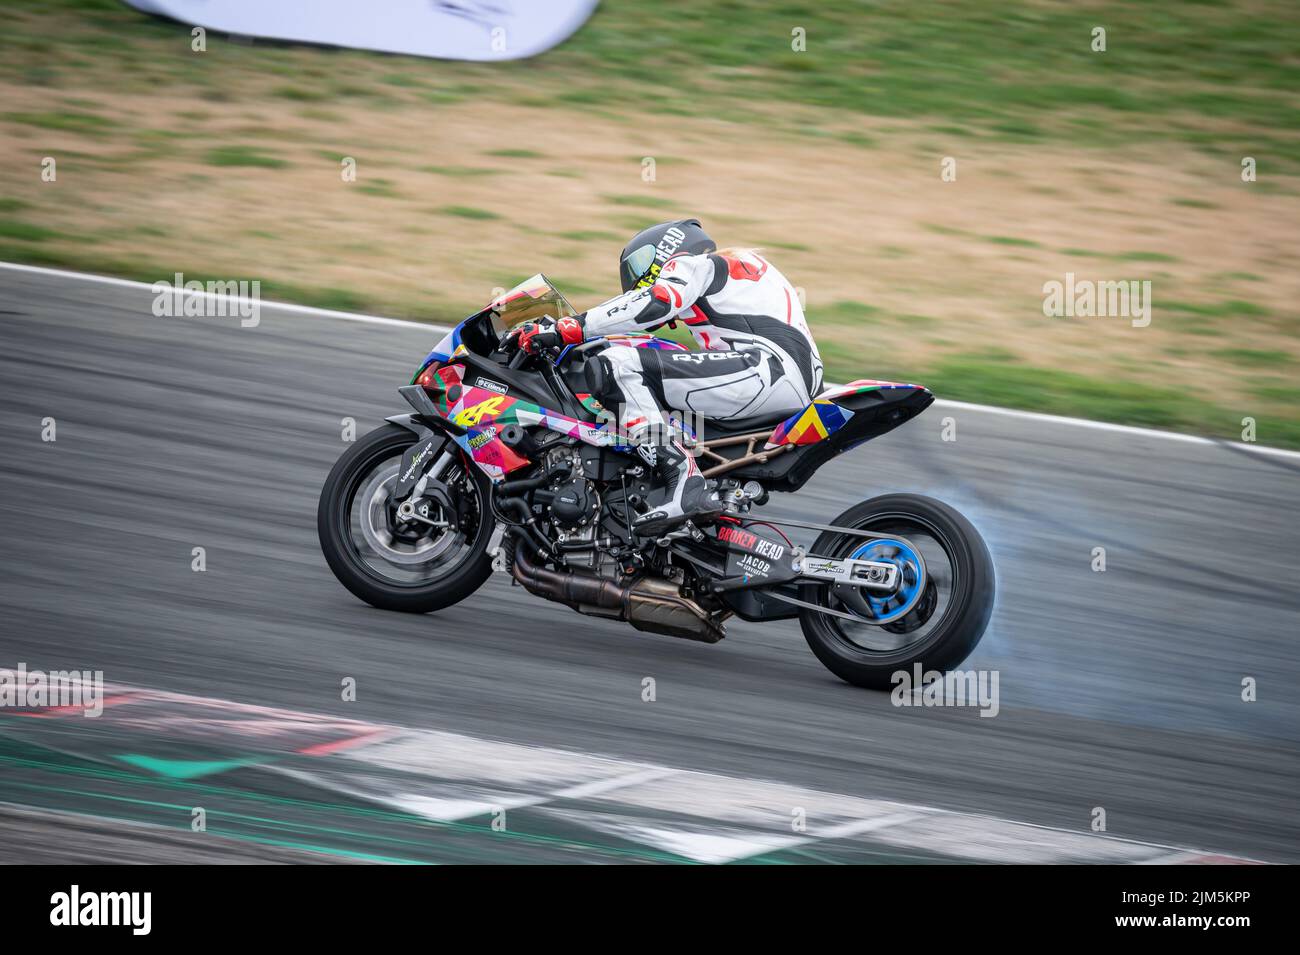 Moto BMW M1000RR doing drift in the track Stock Photo